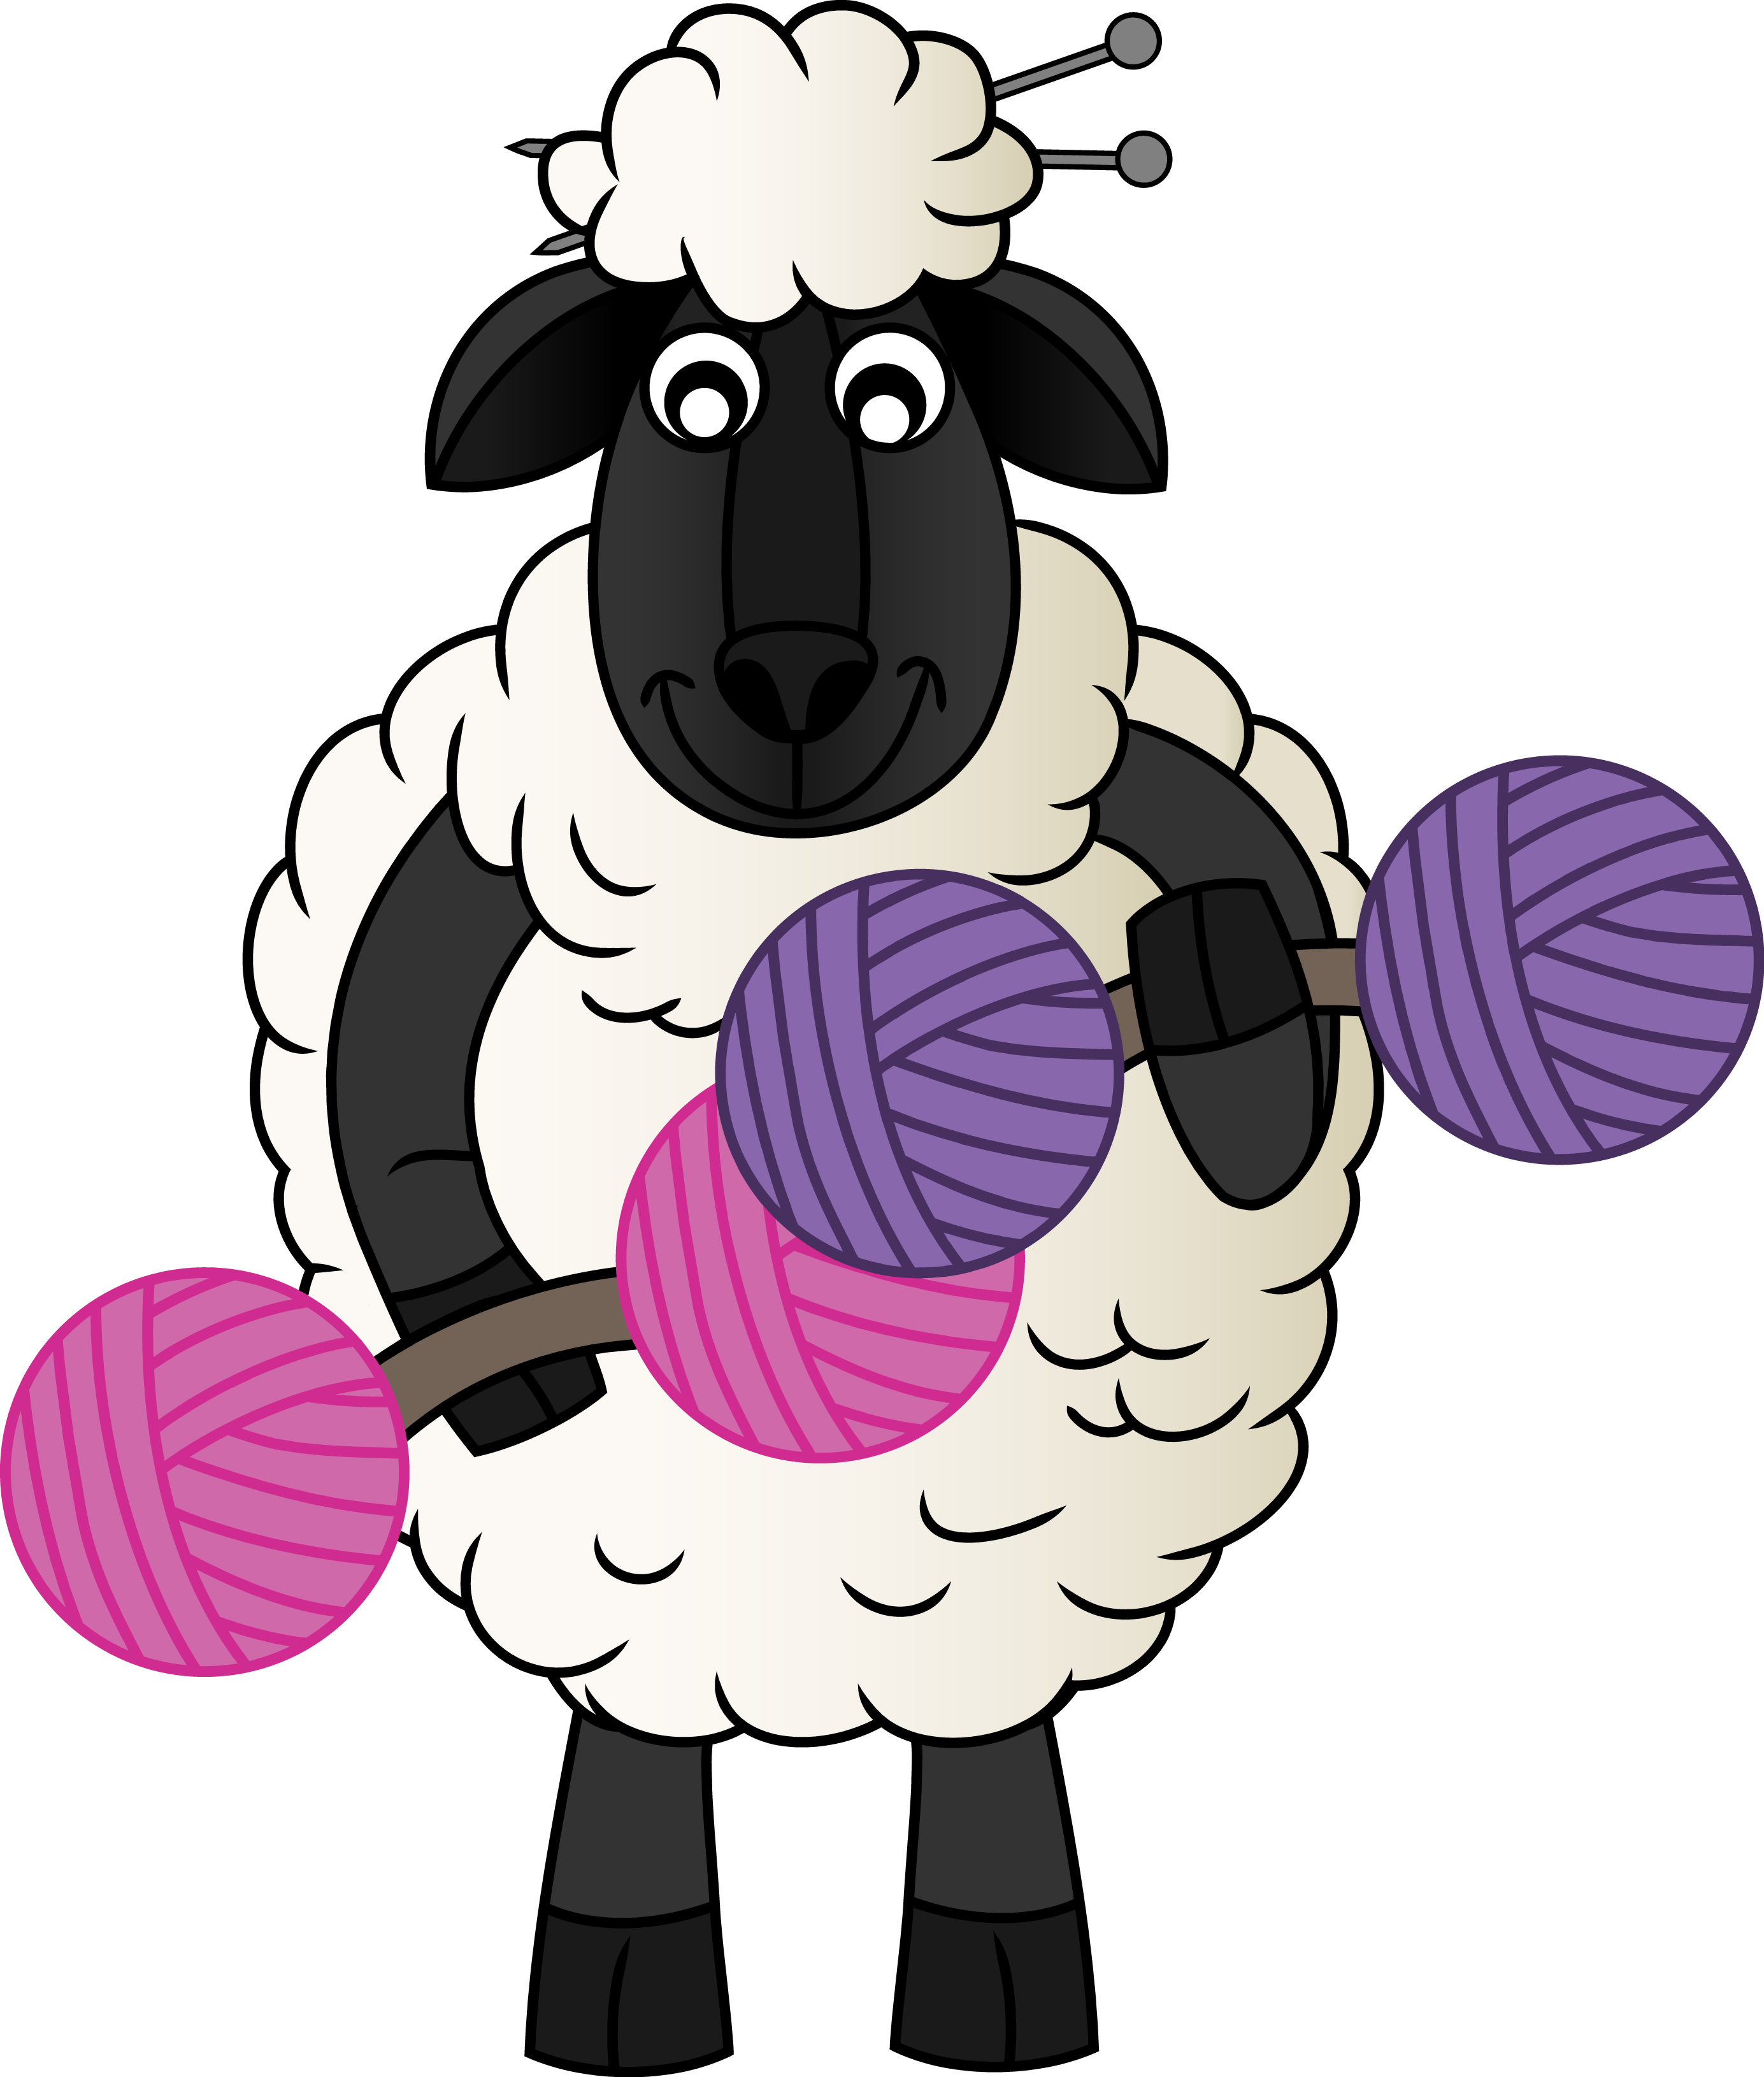 Kniticaltherapy Knitical Therapy Logo Sheep Yarn Dumbells - Knitting (2769x3260)